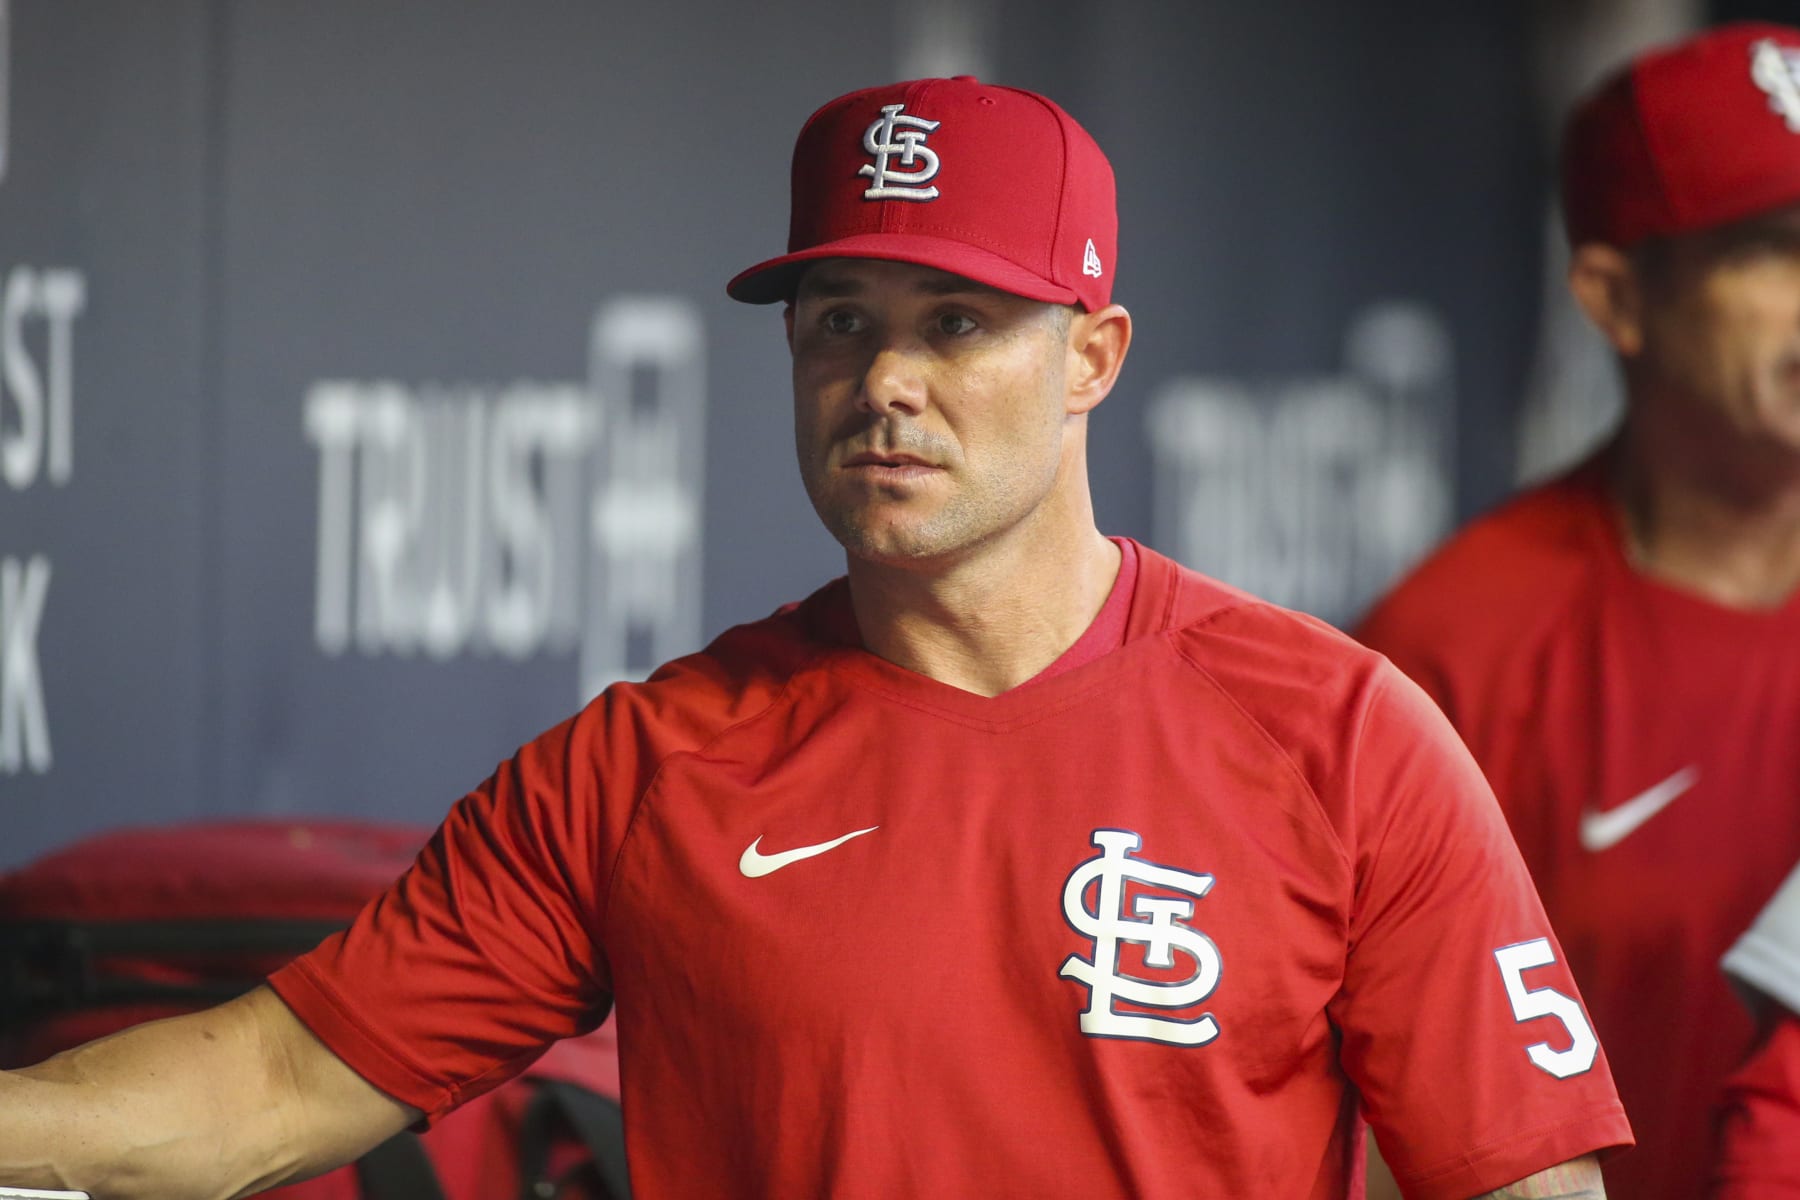 Skip Schumaker Hired as Marlins' New Manager Following Don